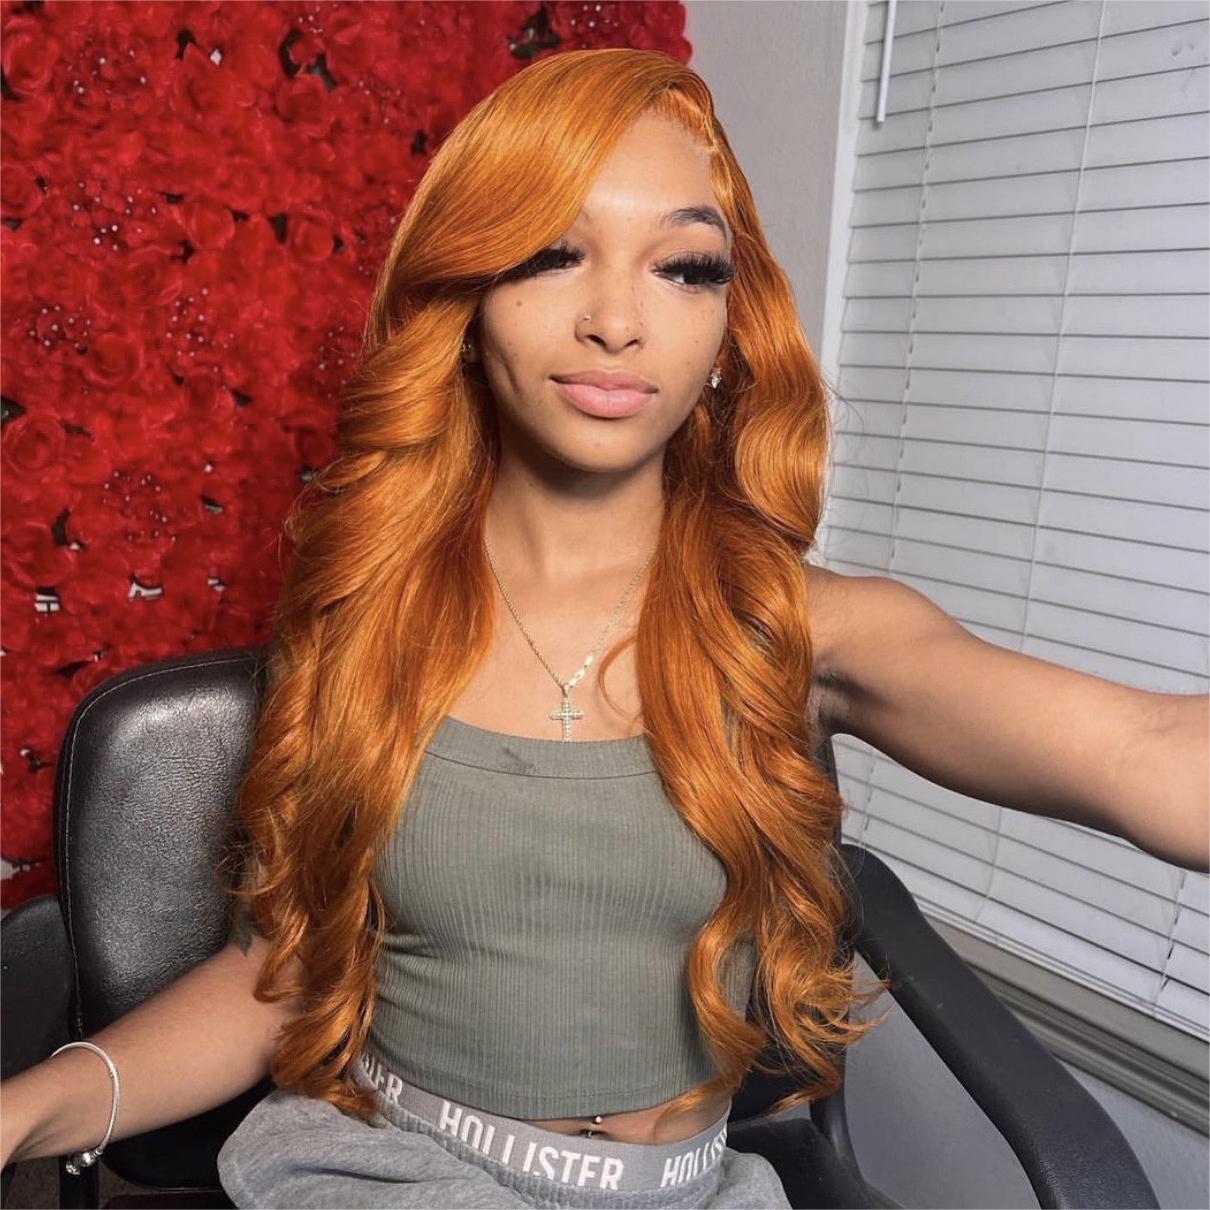 XBL Hair Ginger #350 Human Hair Wig 13x4 Lace Front Wig Body Wave Hair Wig